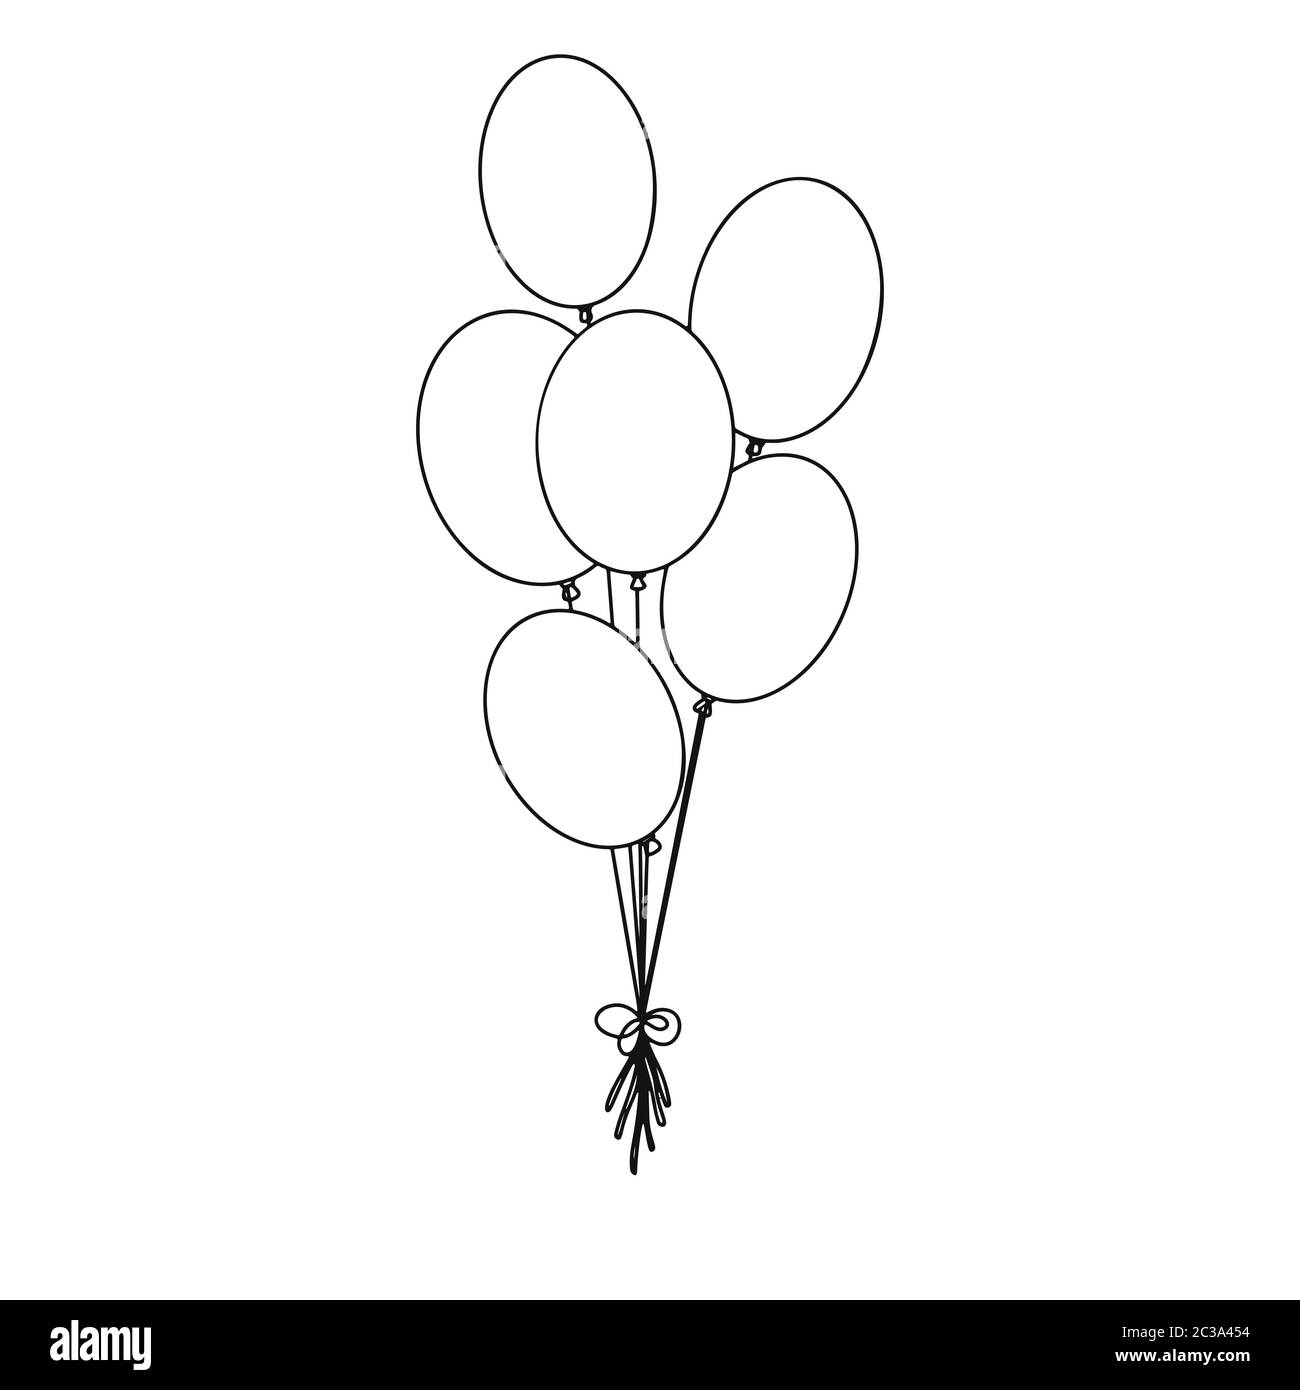 Balloon on string Stock Vector Images - Alamy